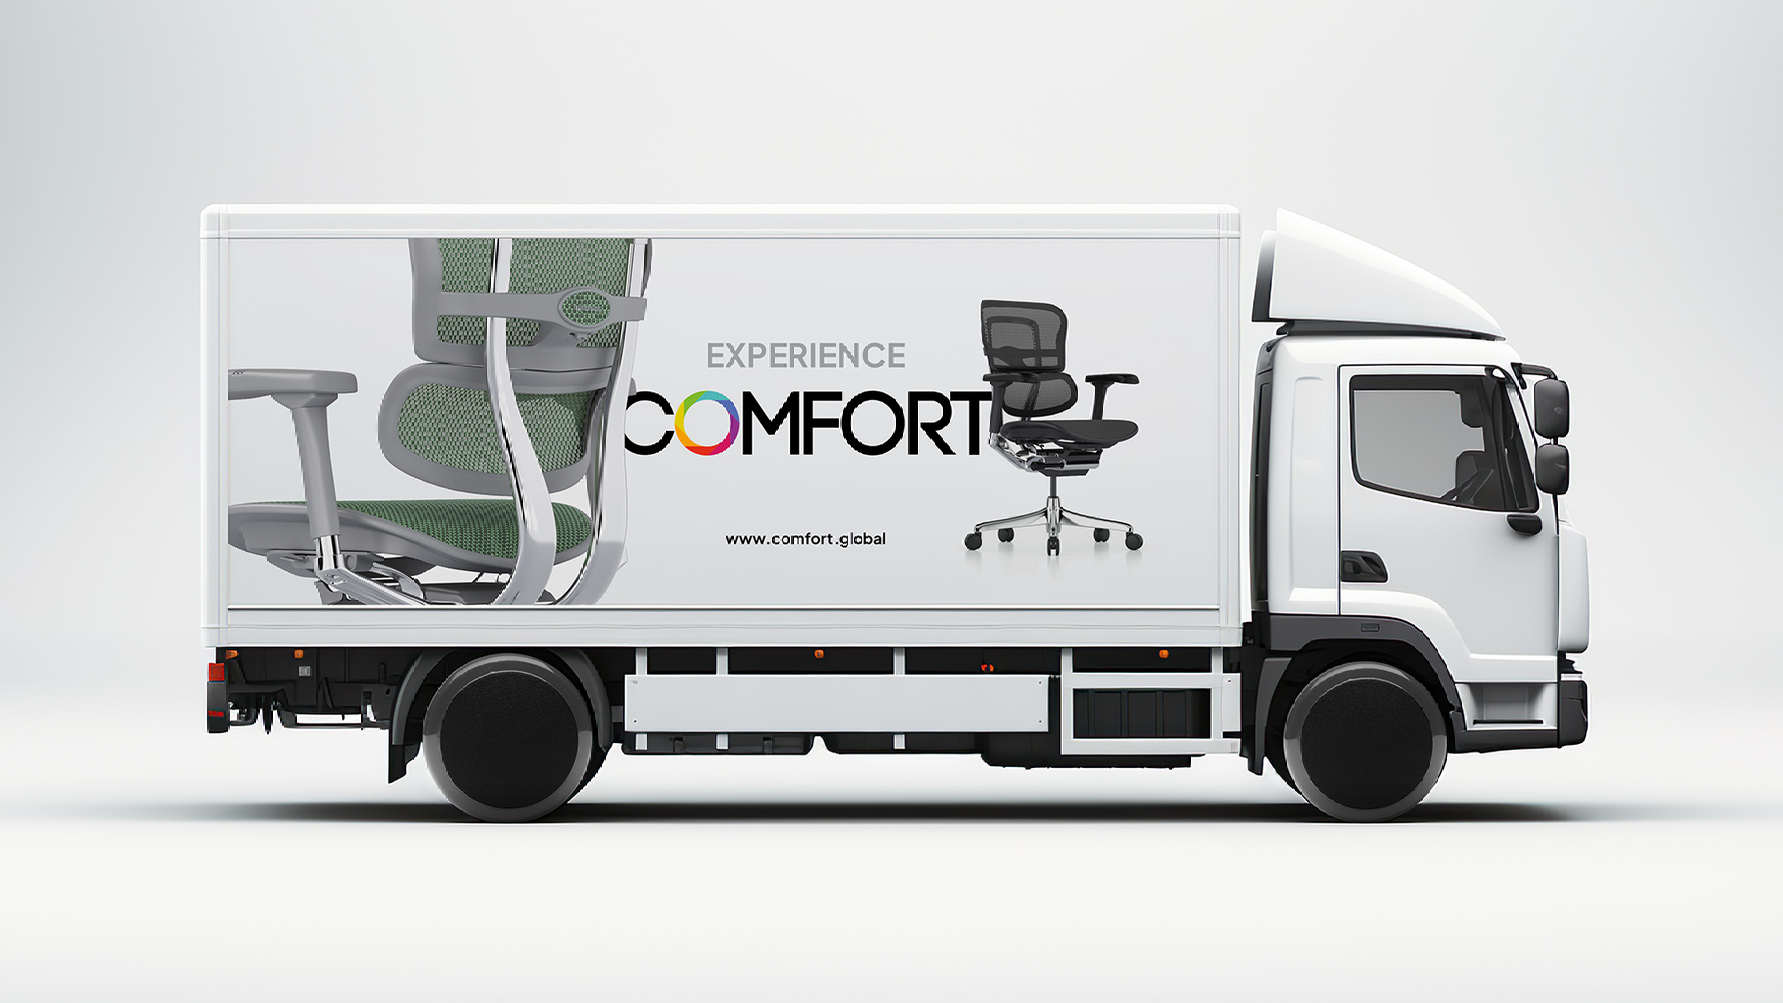 Comfort lorry full of chairs